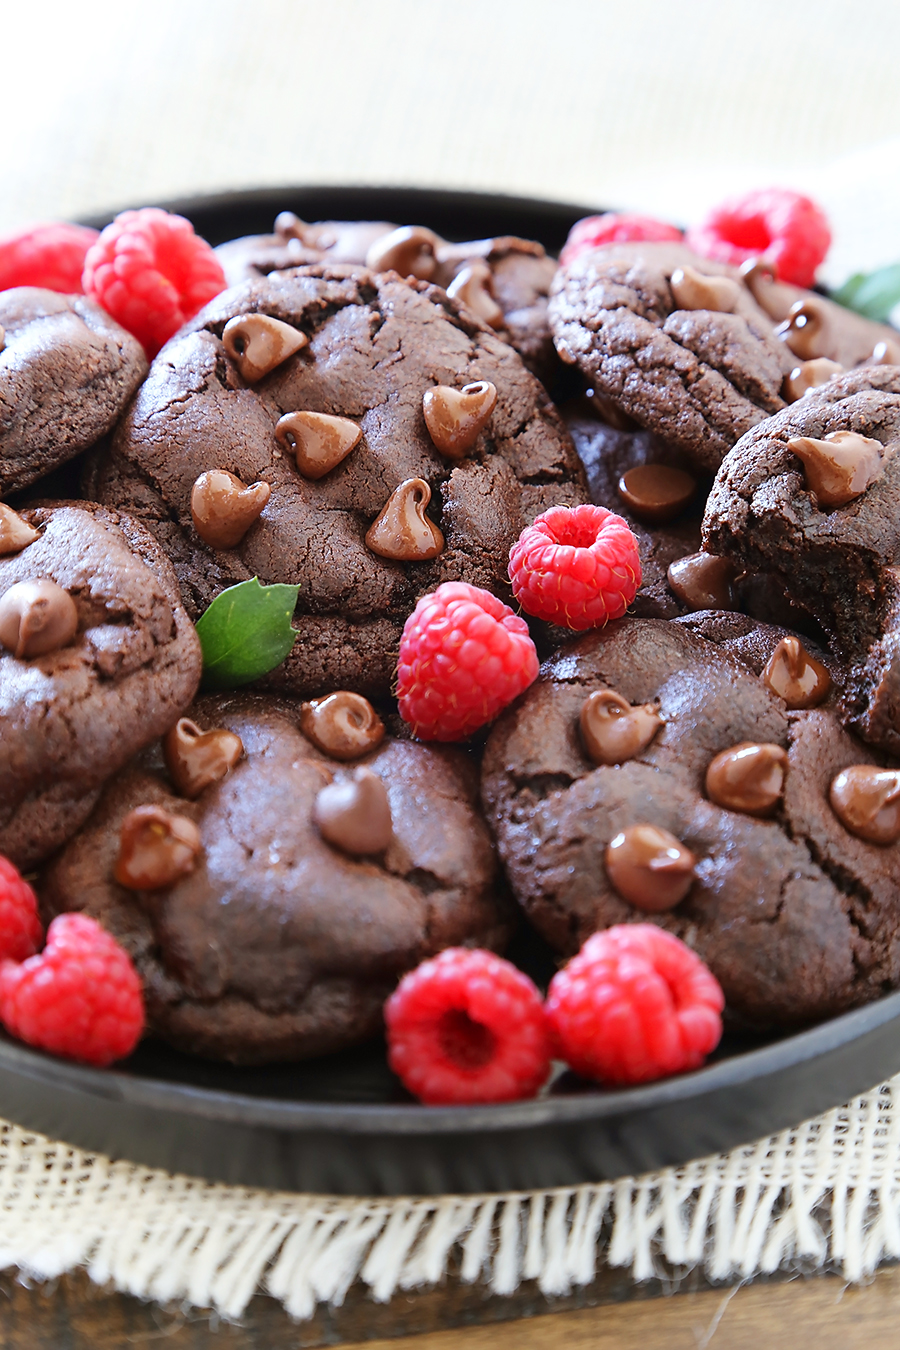 Soft & Chewy Double Chocolate Cookies - These cookies are melt-in-your-mouth good, and so easy to make. Less than 10 ingredients + 10 minutes in the oven! thecomfortofcooking.com